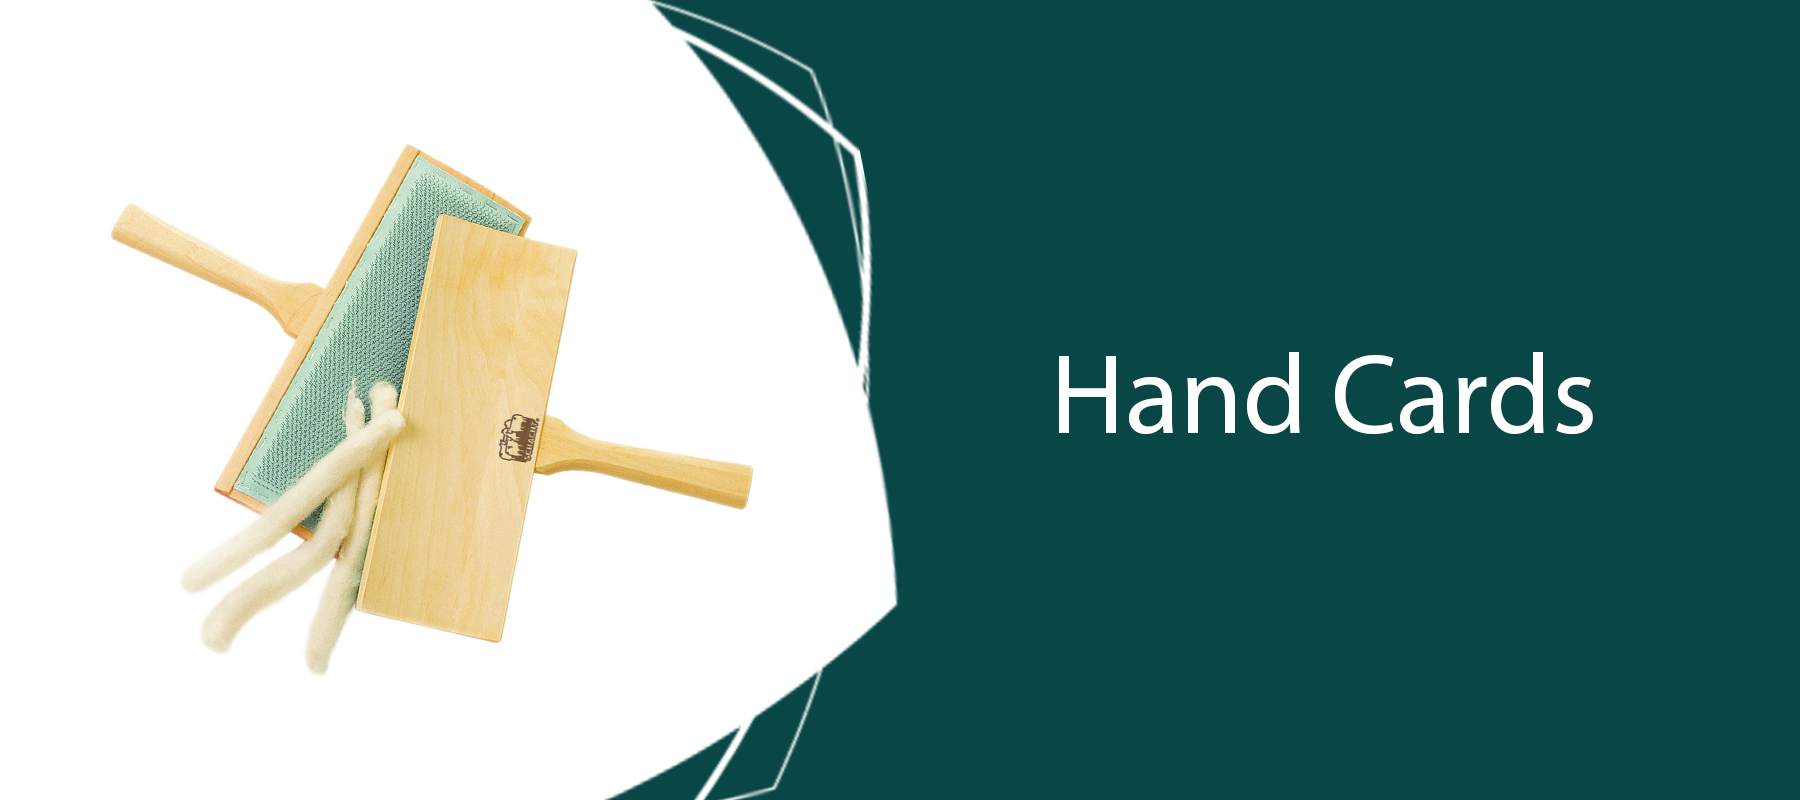 Hand Cards - Prepare Your Fibre For Spinning & Felting